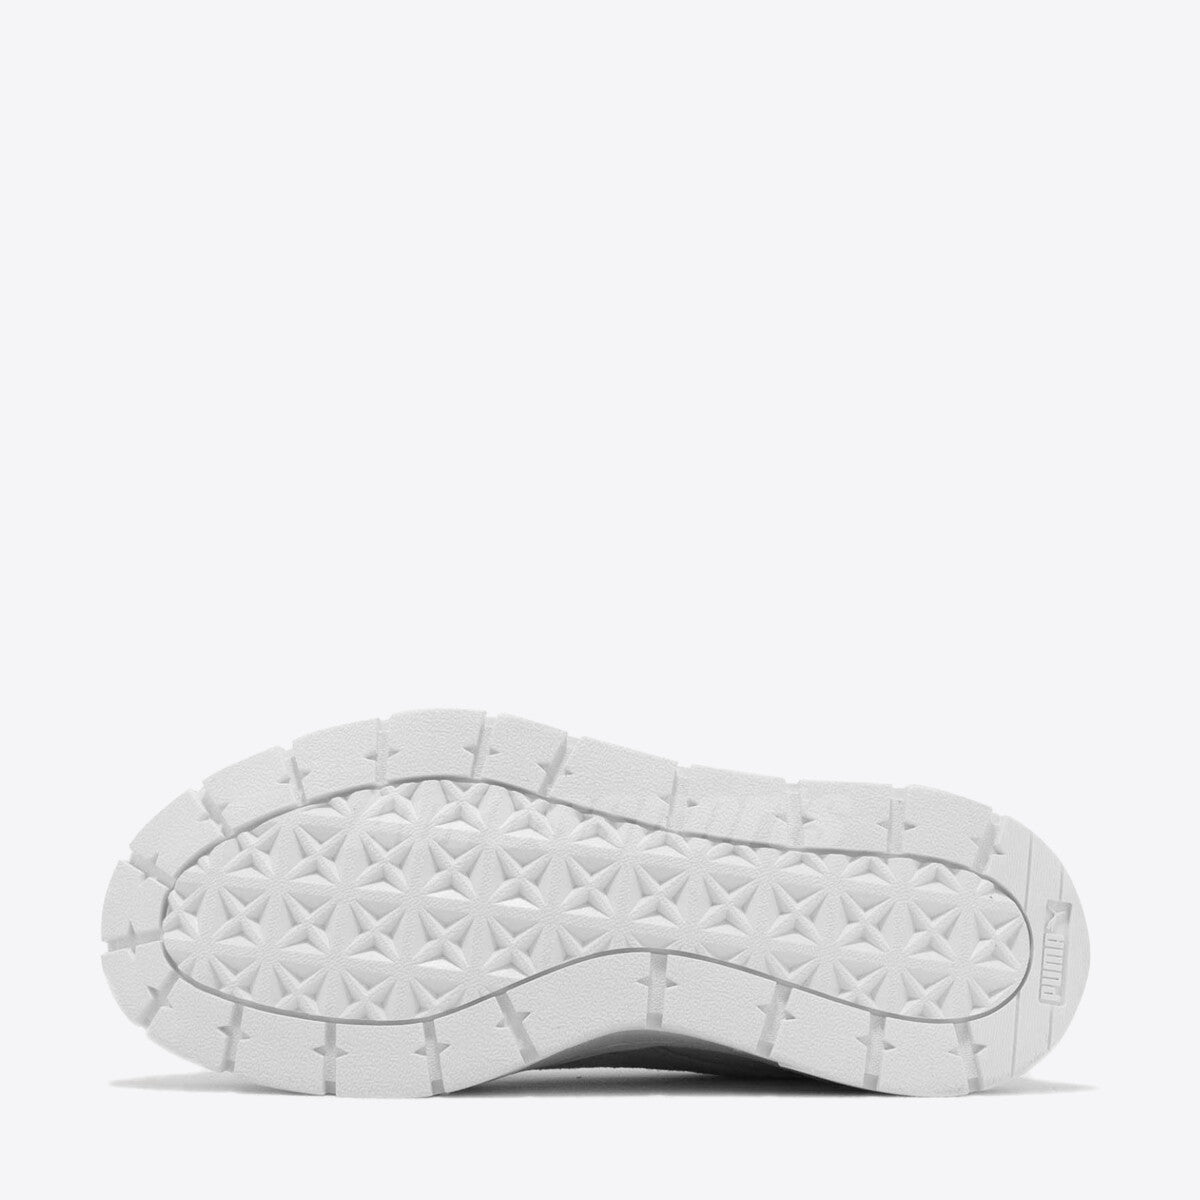 PUMA Mayze Stack Luxe Marshmallow/Marble - Image 4